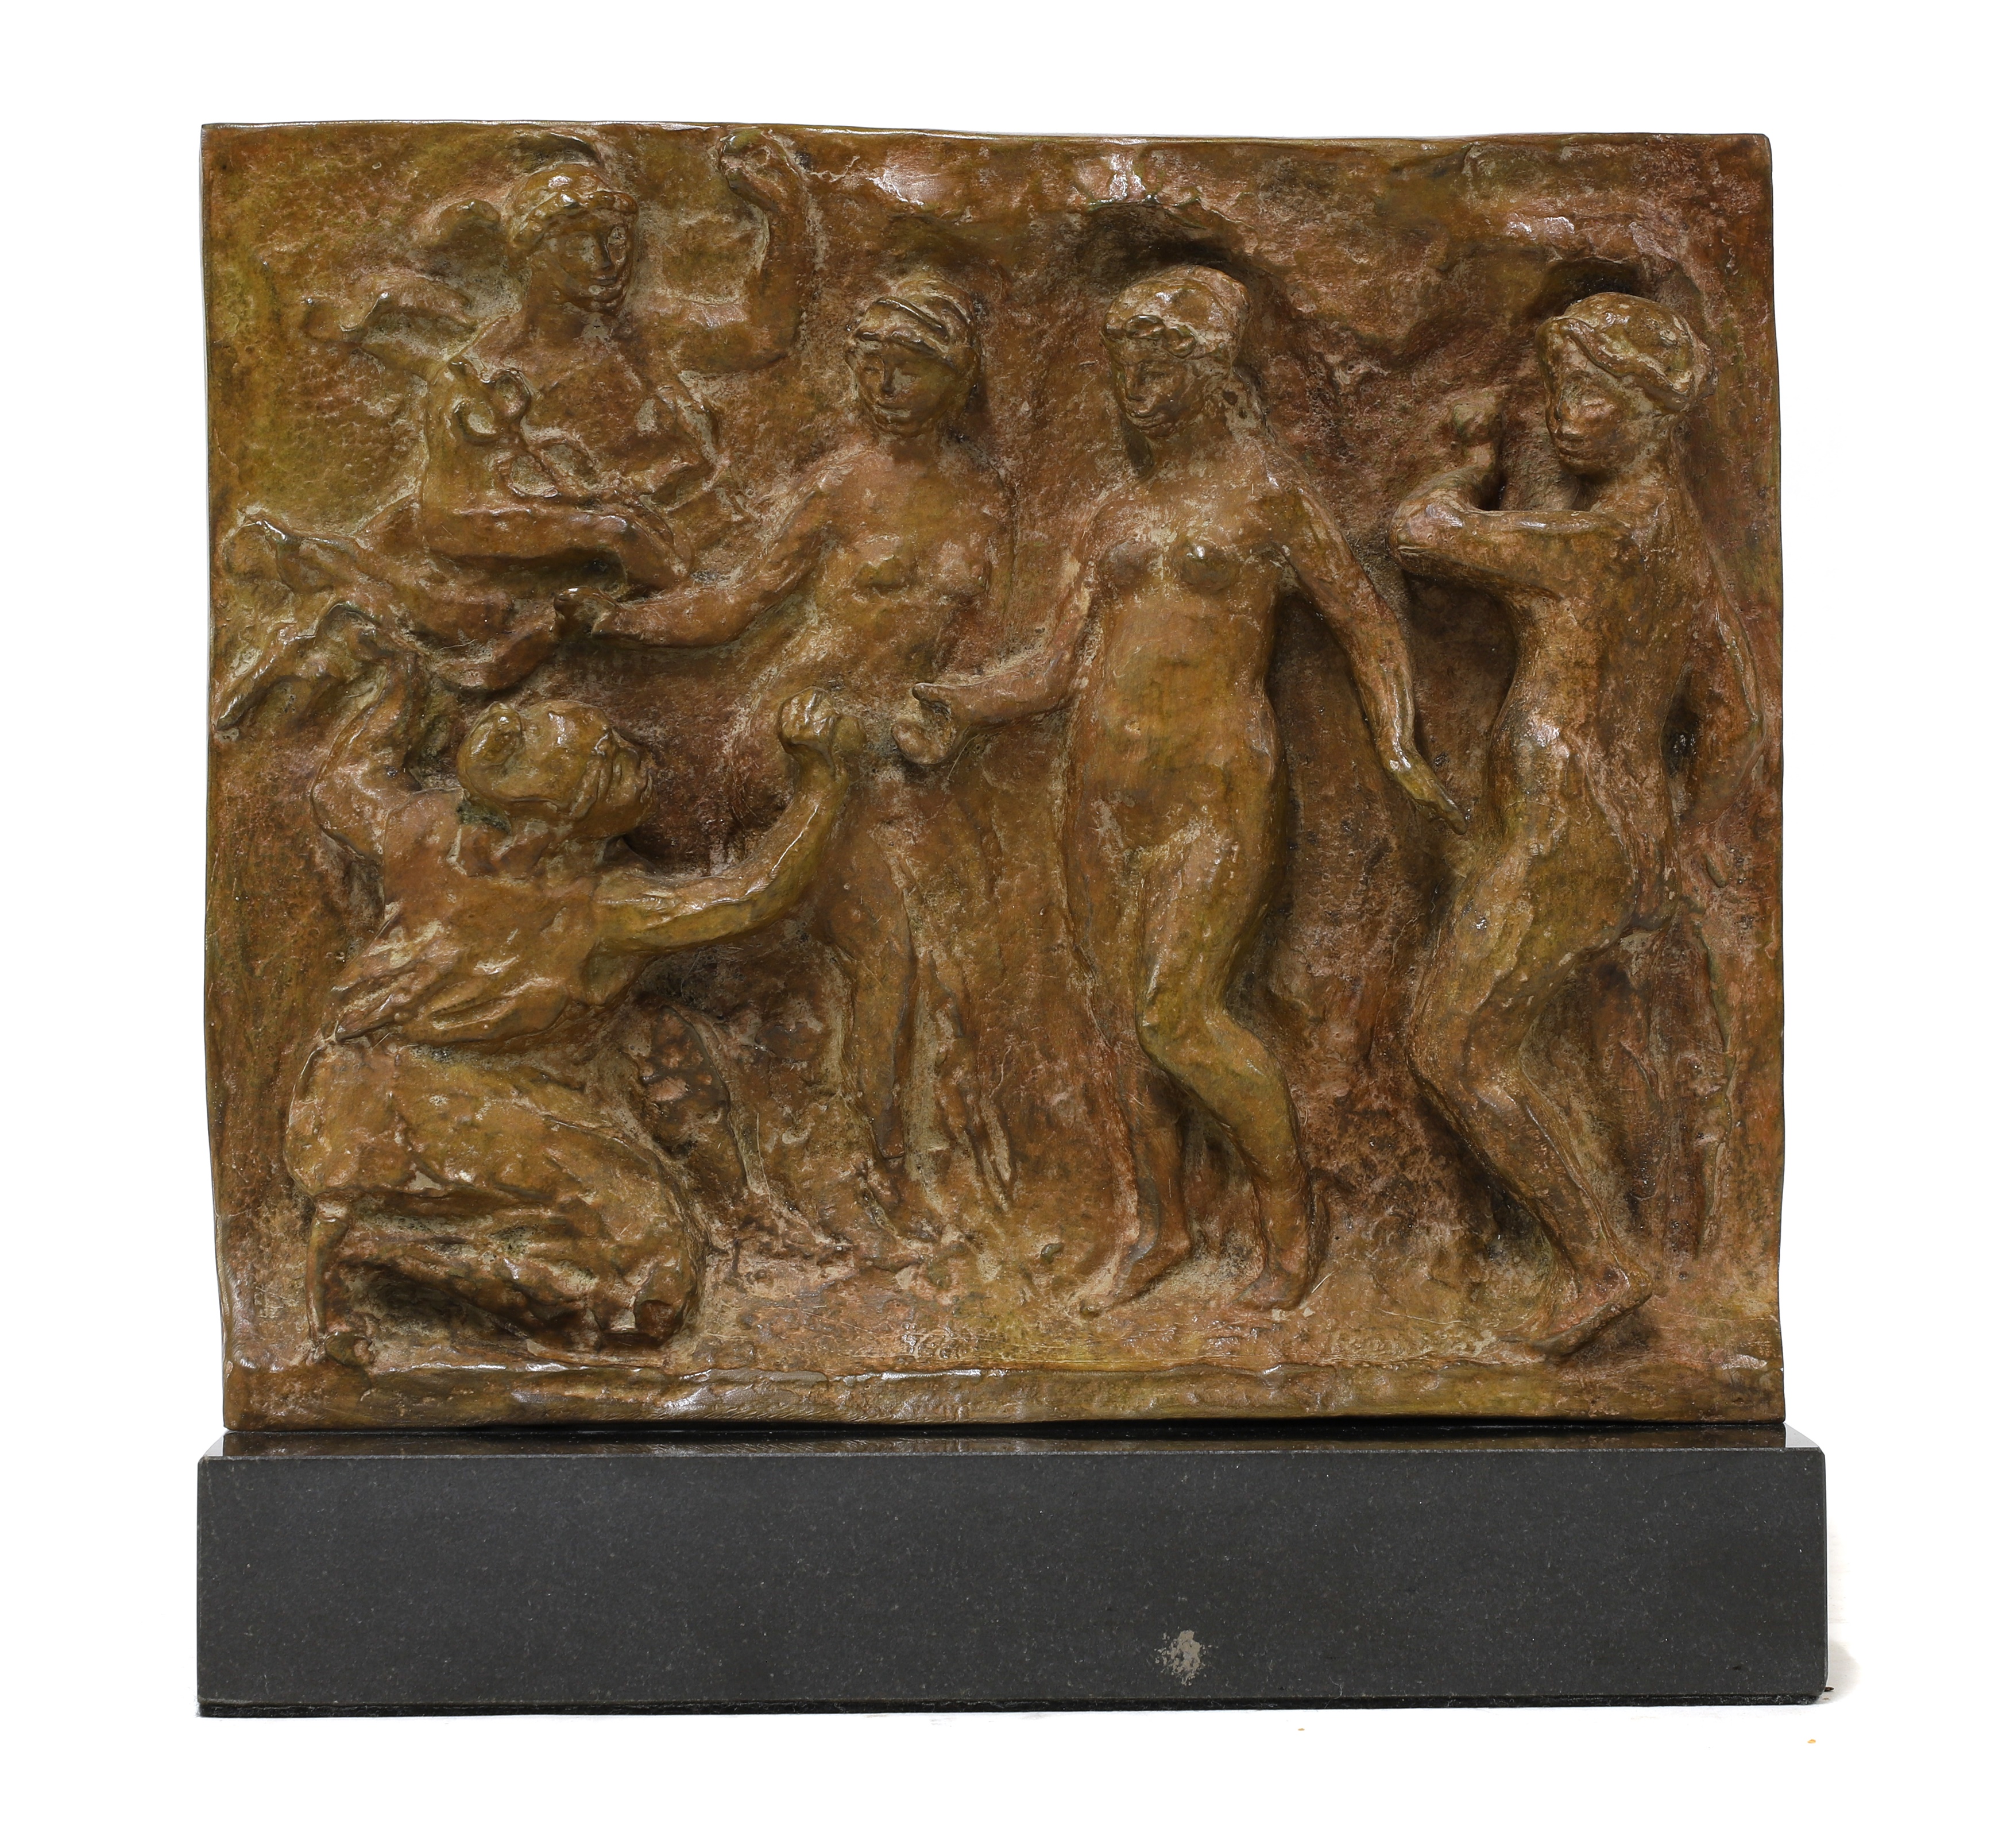 Richard Guino (French, 1890-1973), after Pierre-Auguste Renoir, 'Judgement of Paris', bronze, with a bronze patina, signed 'Renoir' l.r. 32cm wide, 4.5cm deep, 25.5cm high, on base 32cm high overall. (£10,000-15,000)